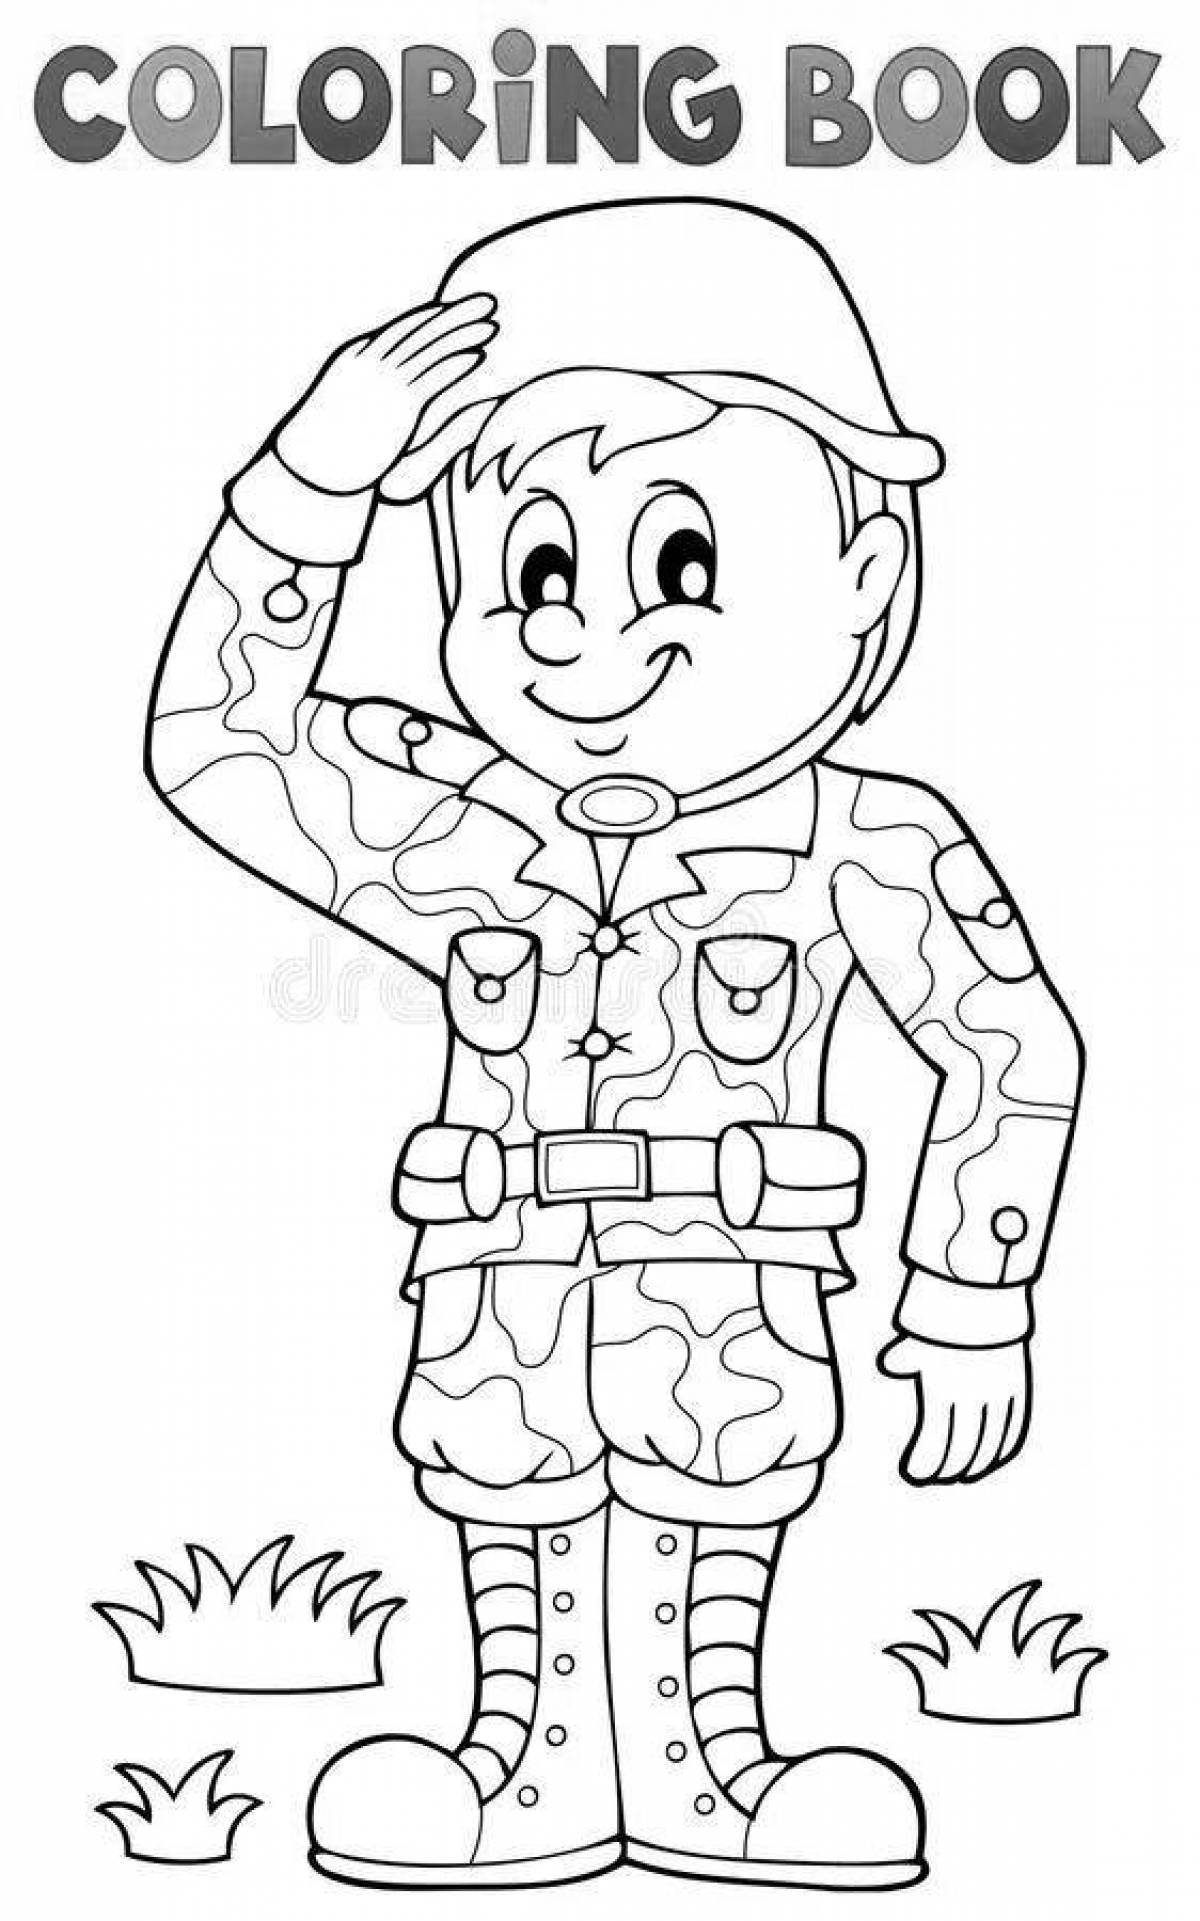 Majestic soldier coloring page February 23